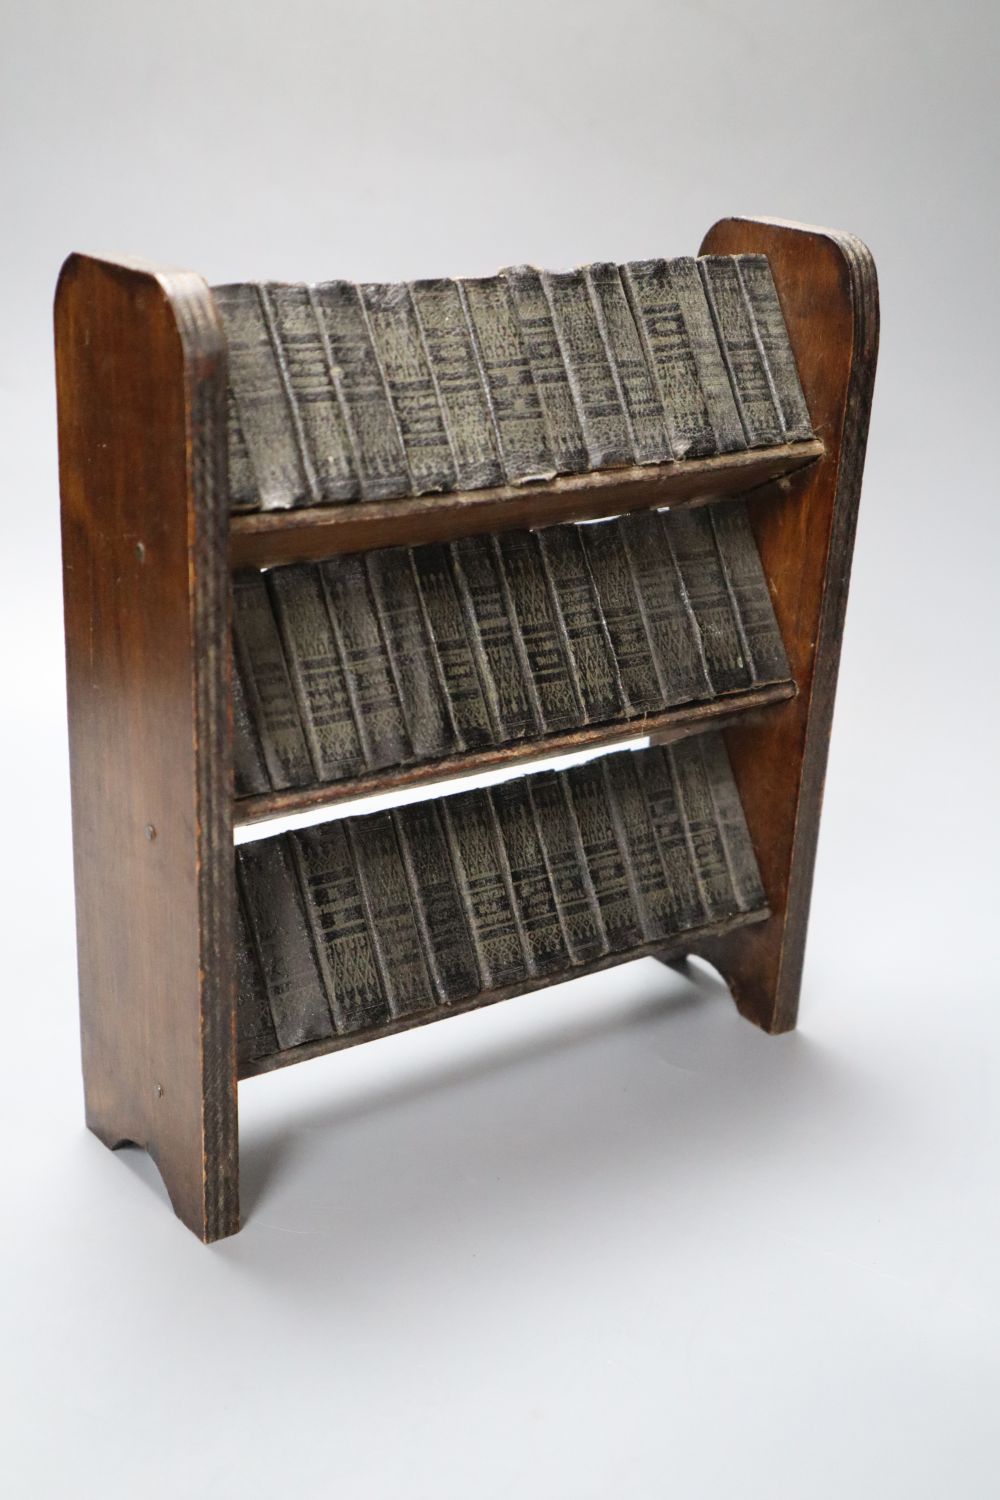 Shakespeare's Works in miniature, 40 volumes on original three-shelf open bookcase, 20cm wide - Image 2 of 3